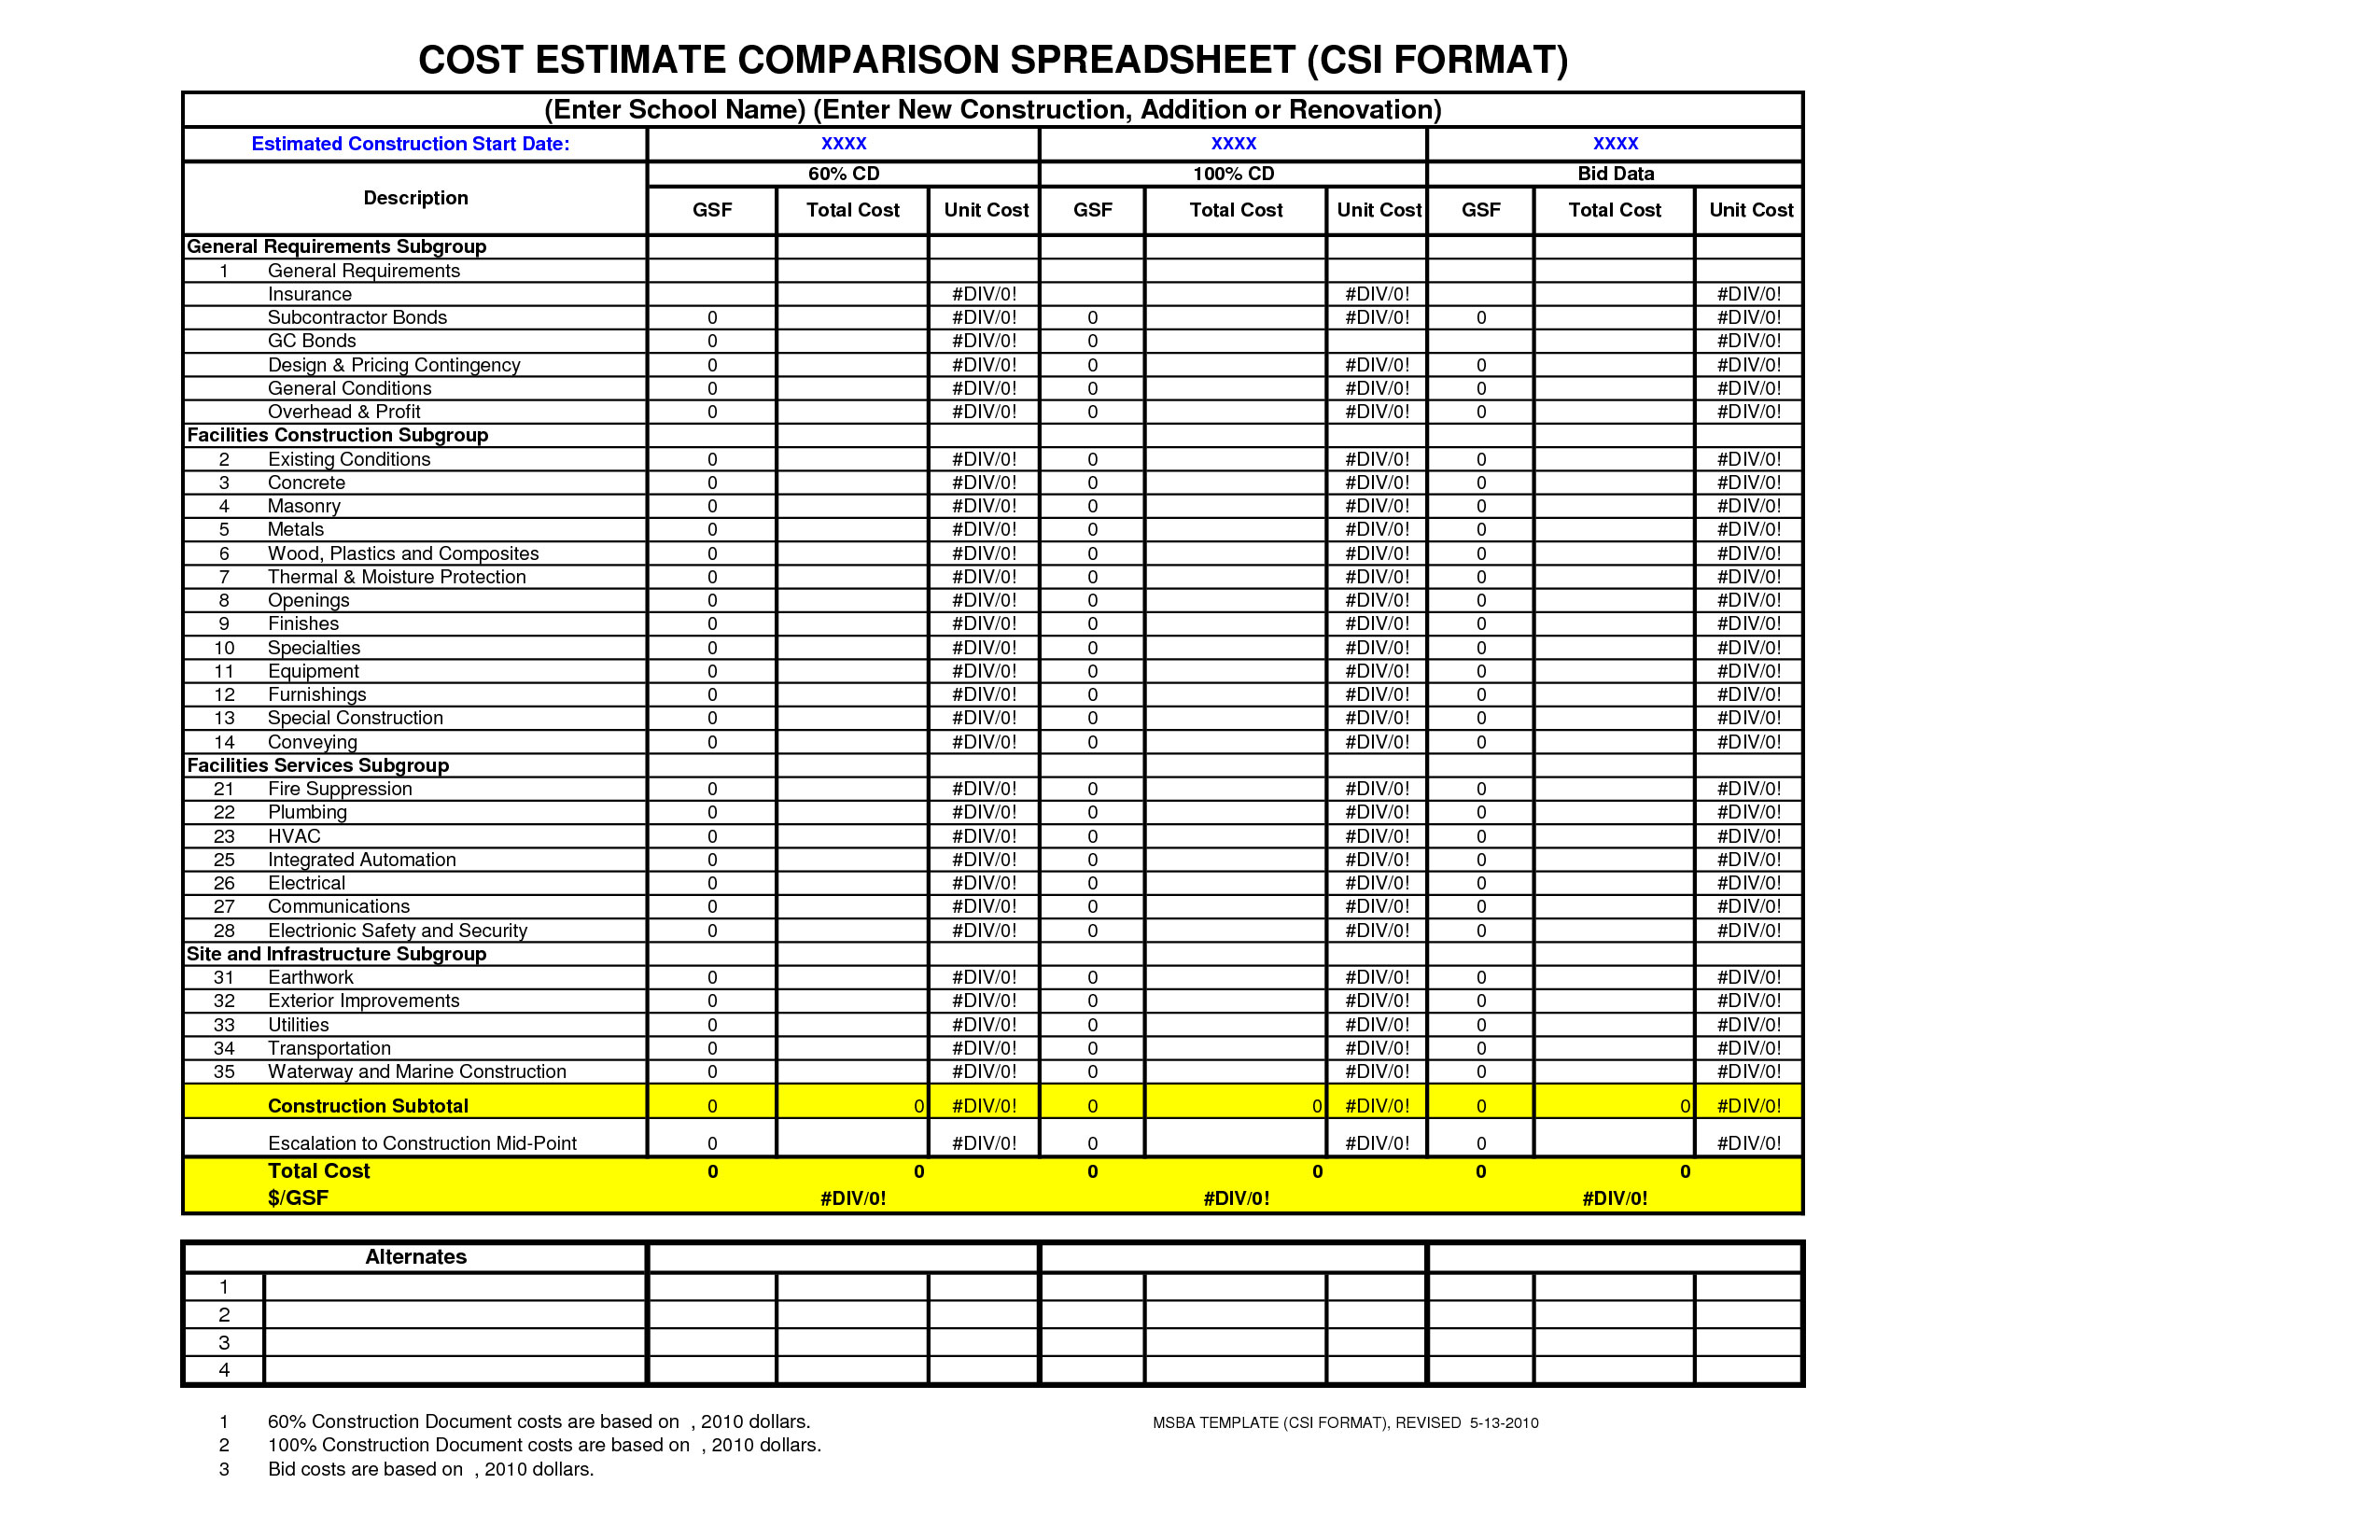 Spreadsheet Software Comparison For Cost Estimate Comparison Spreadsheet  Cost Estimate Spreadsheet